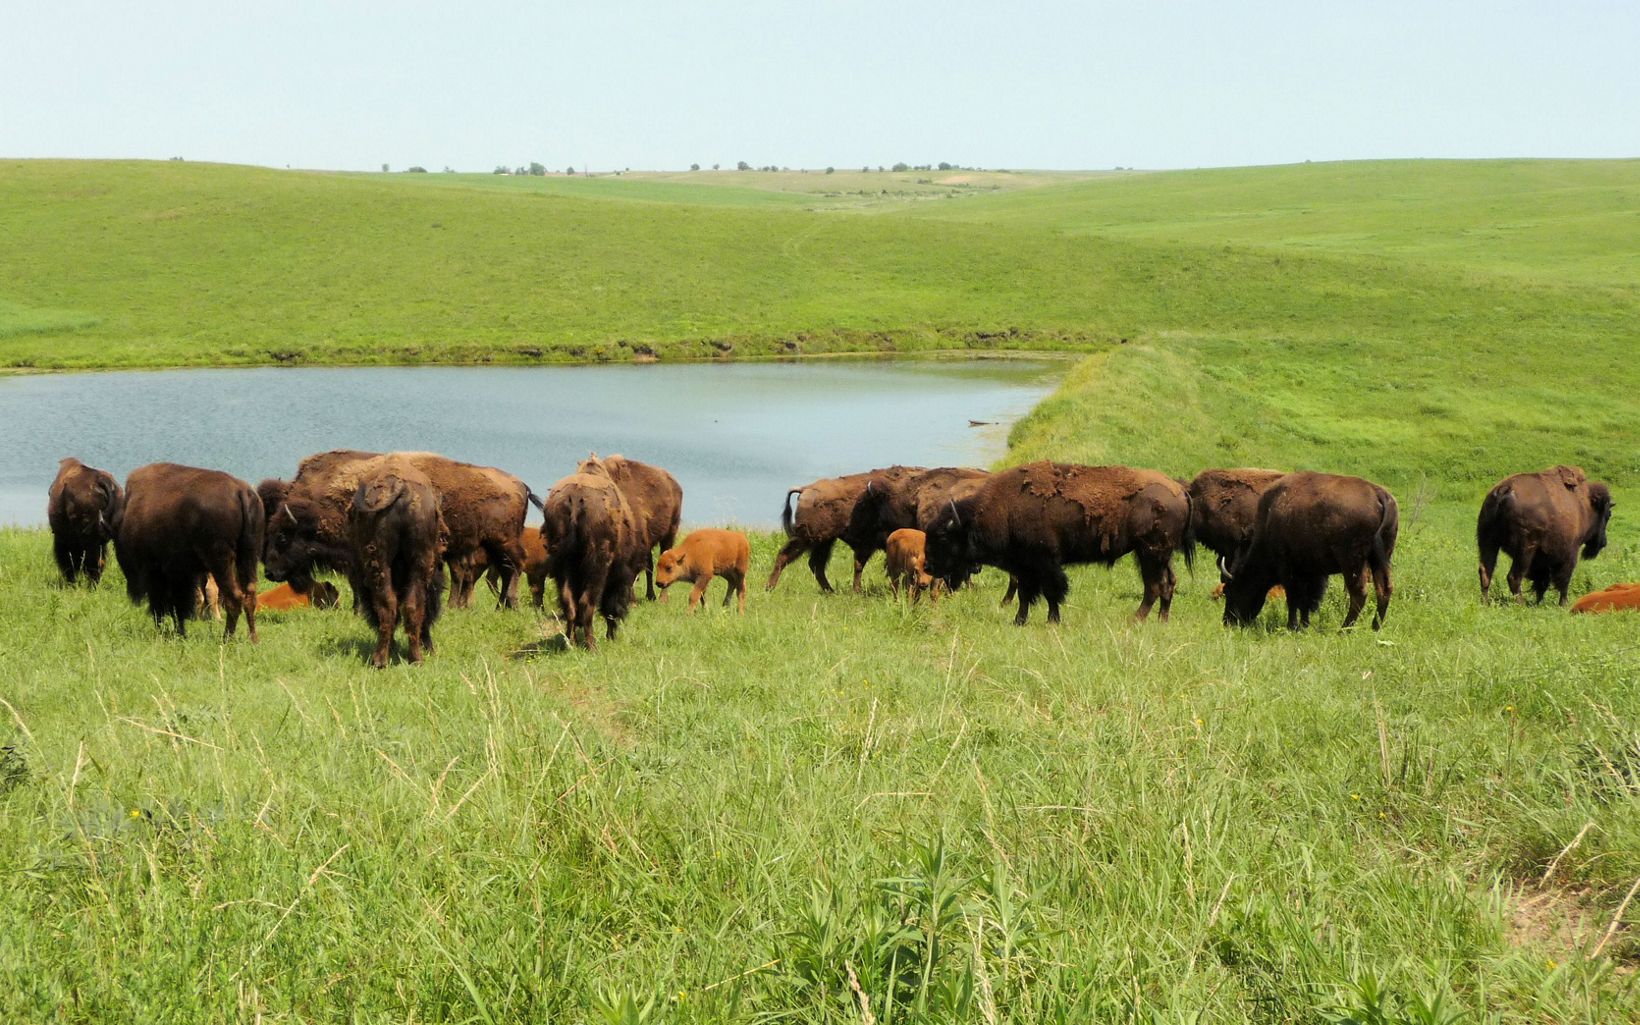 A herd of bison on the bright green prairie with a body of water behind them.